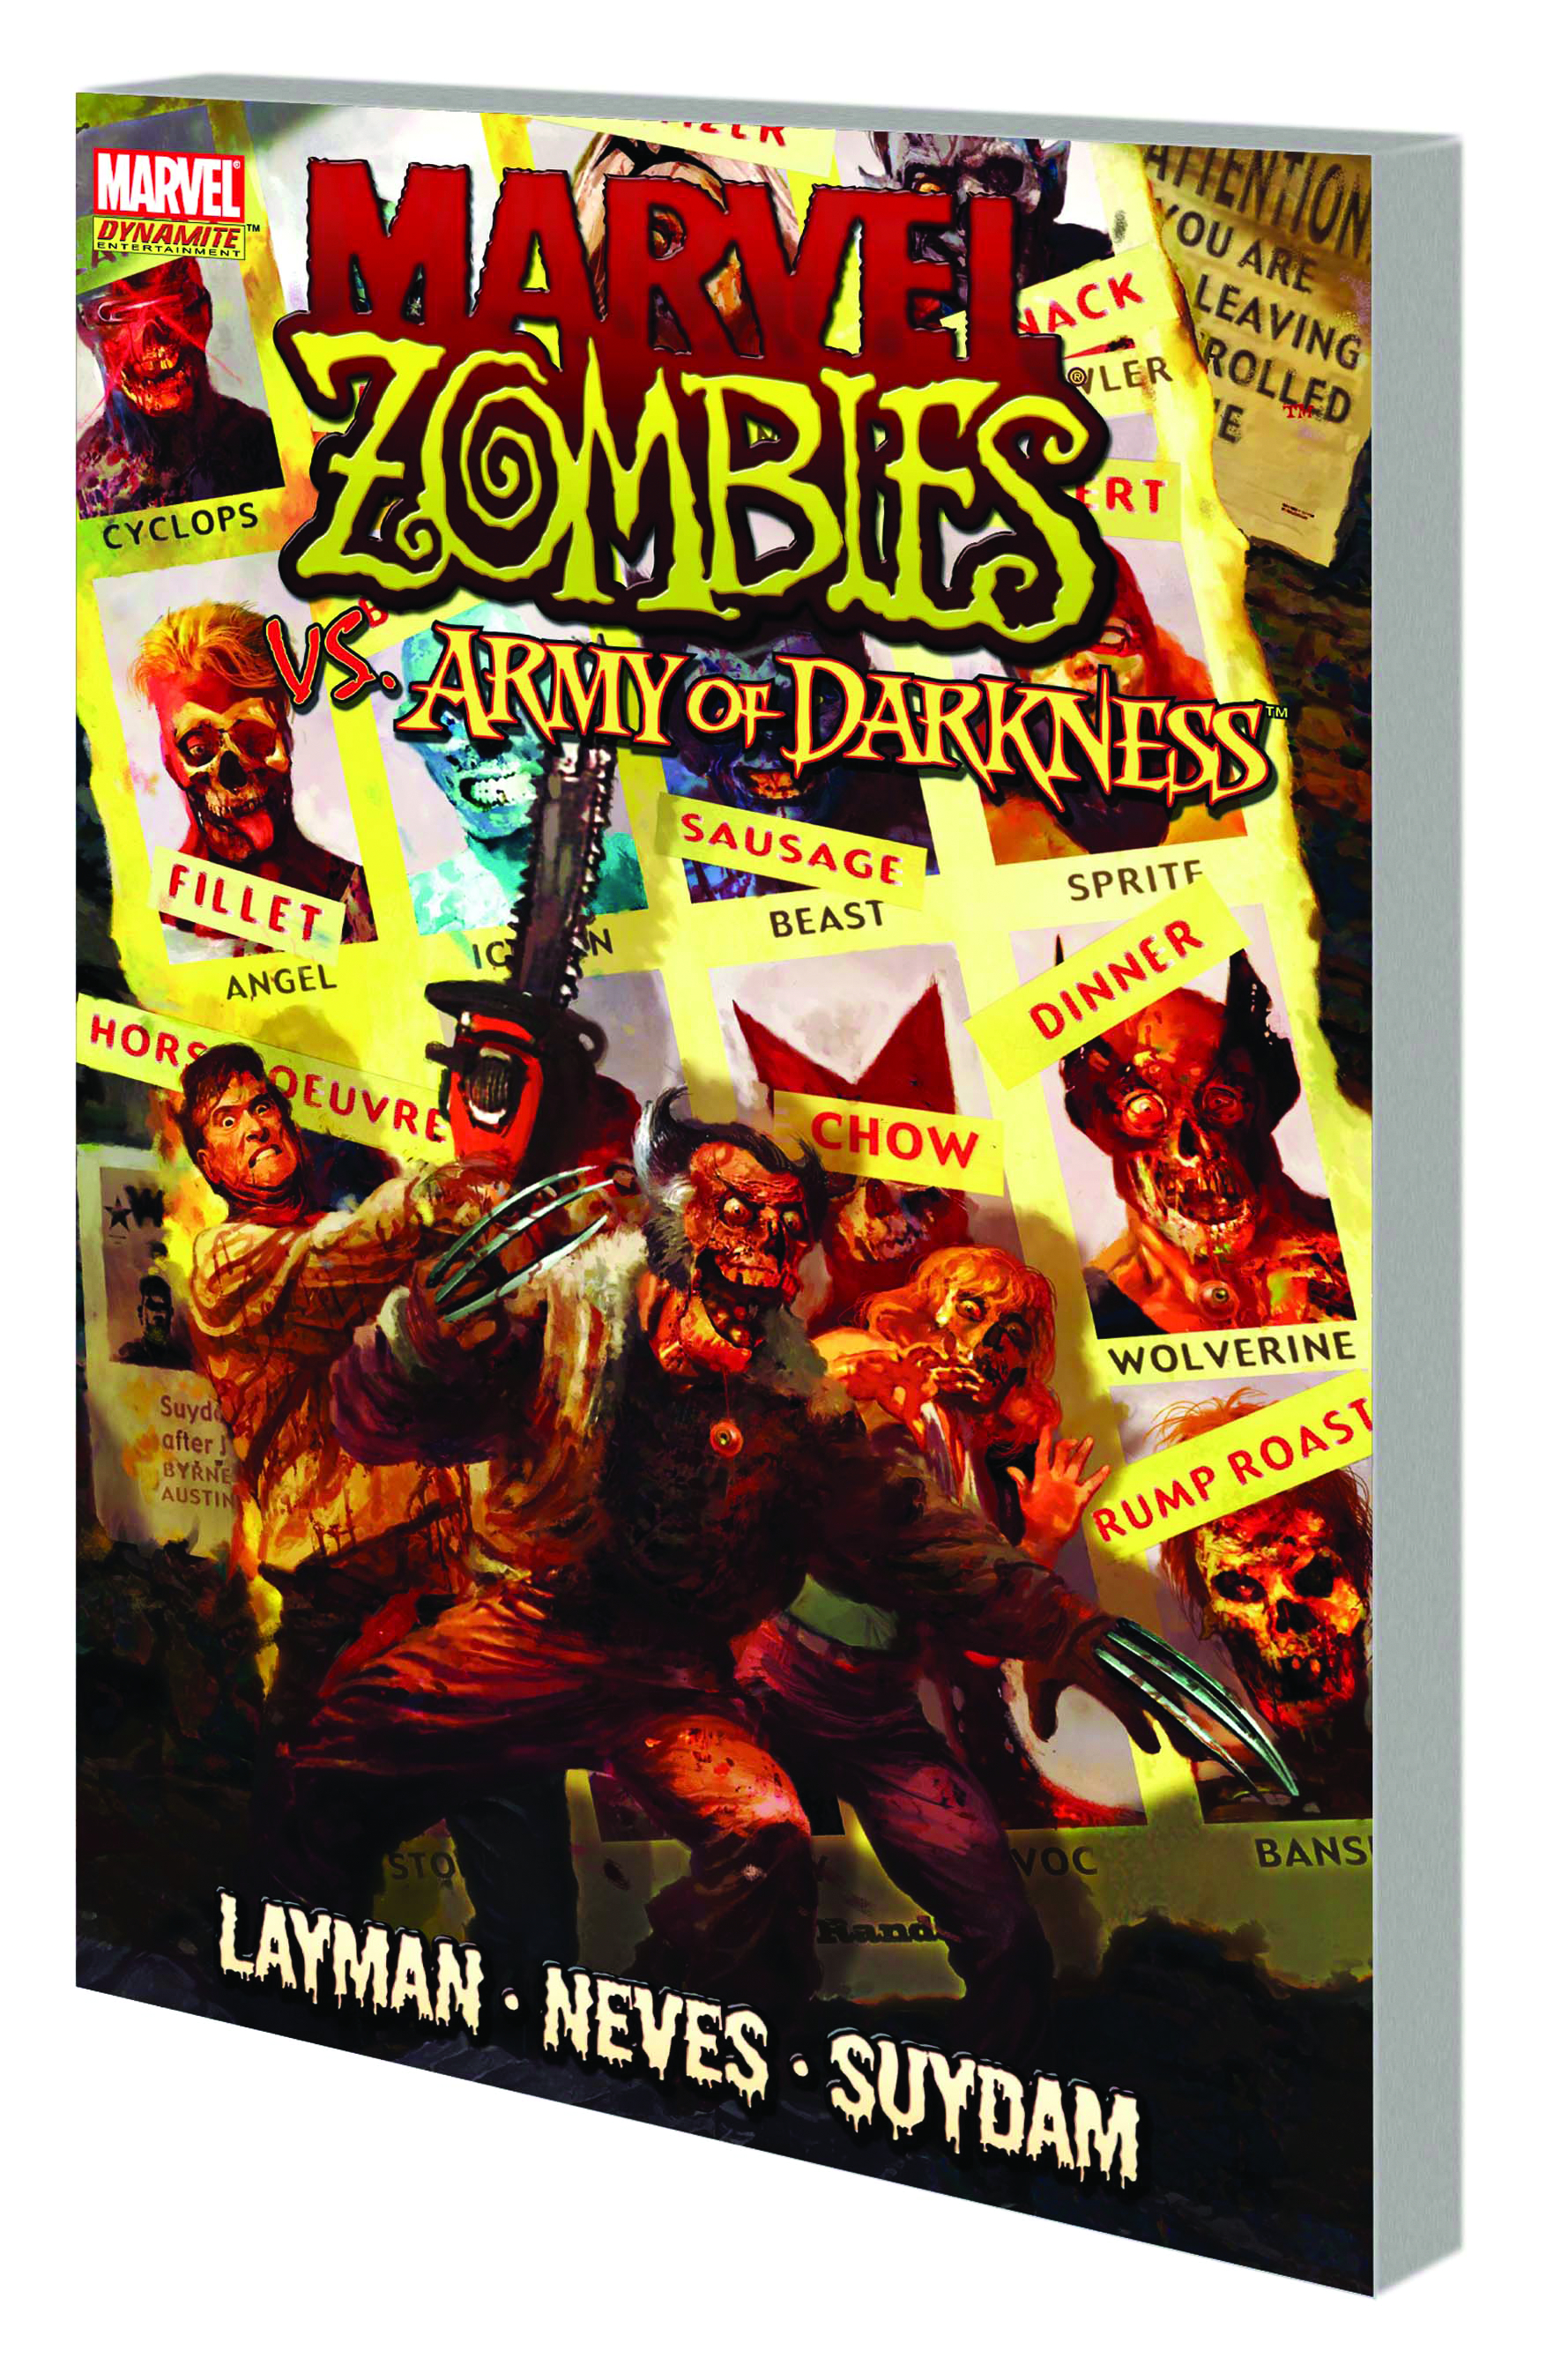 Marvel zombies vs army of darkness